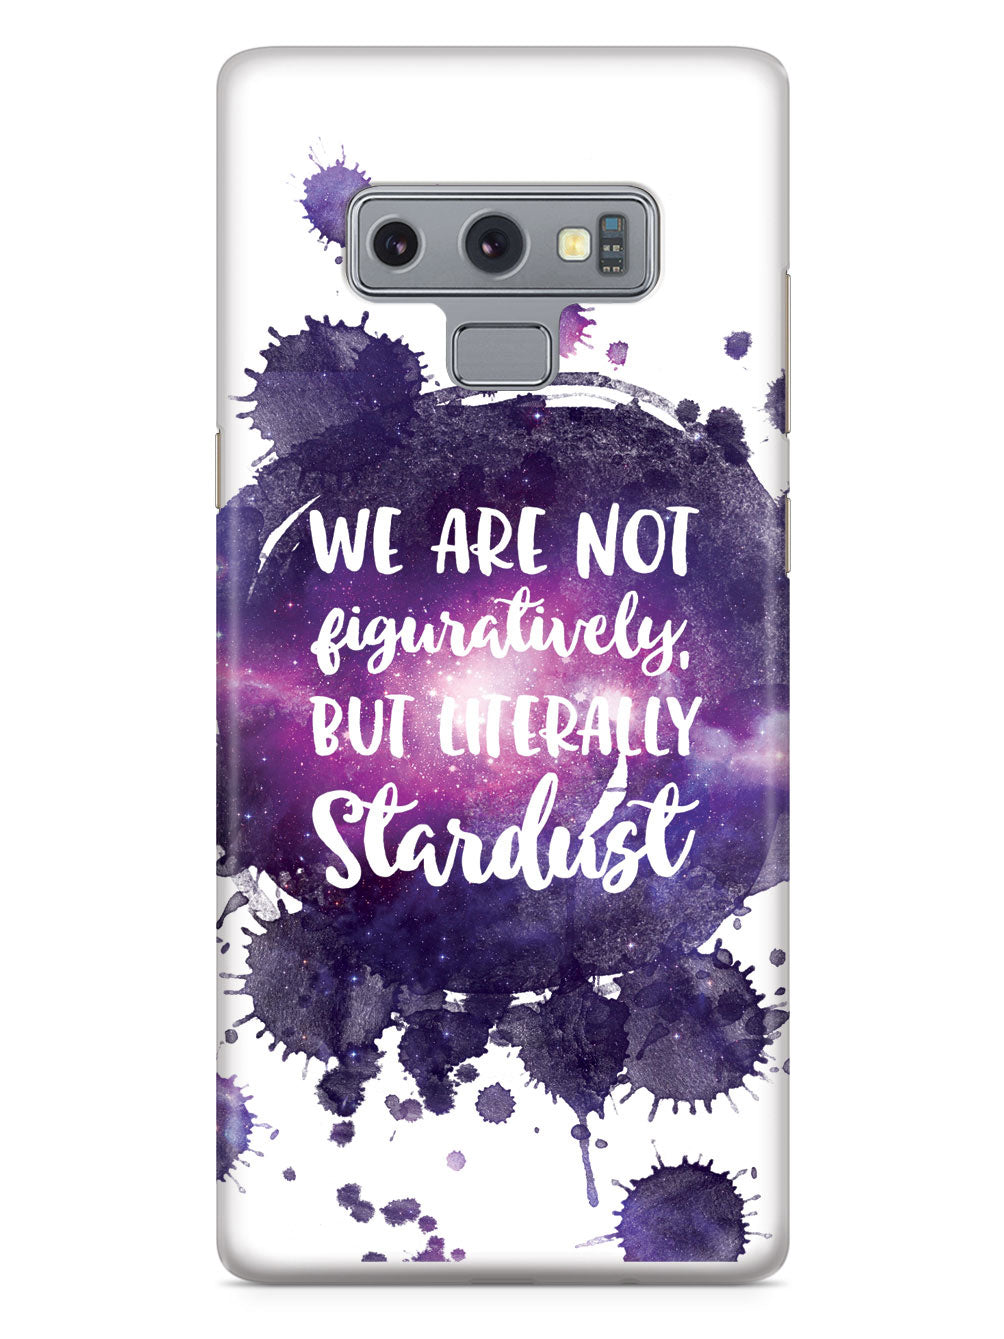 We are Stardust - Neil deGrasse Tyson Quote Case